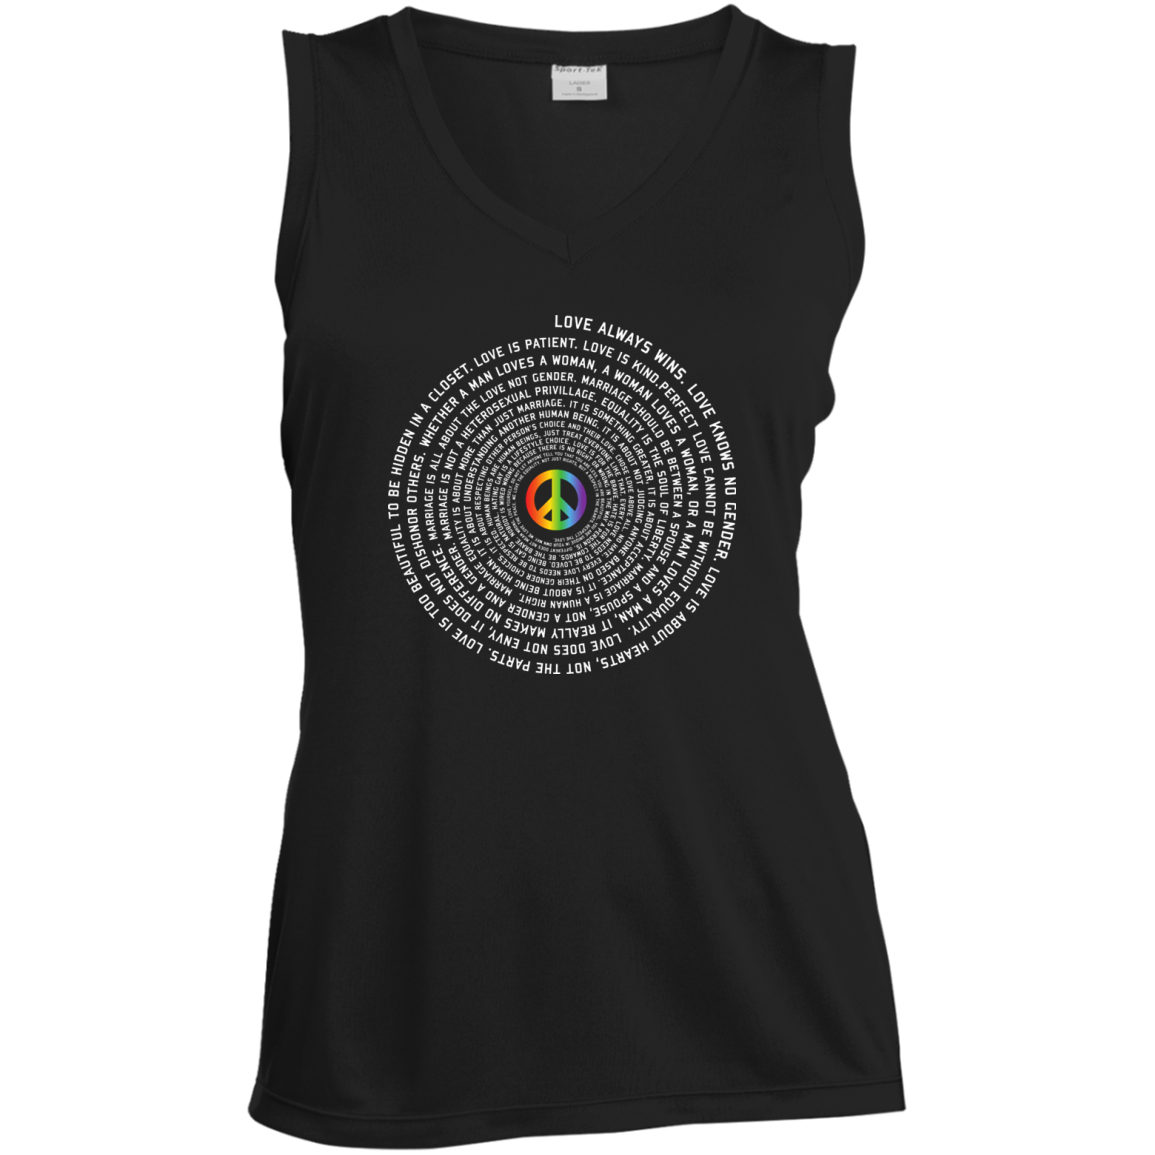 "Pride Month Peace" Special women sleeveless tshirt LGBT Pride Peace symboll womens tshirt